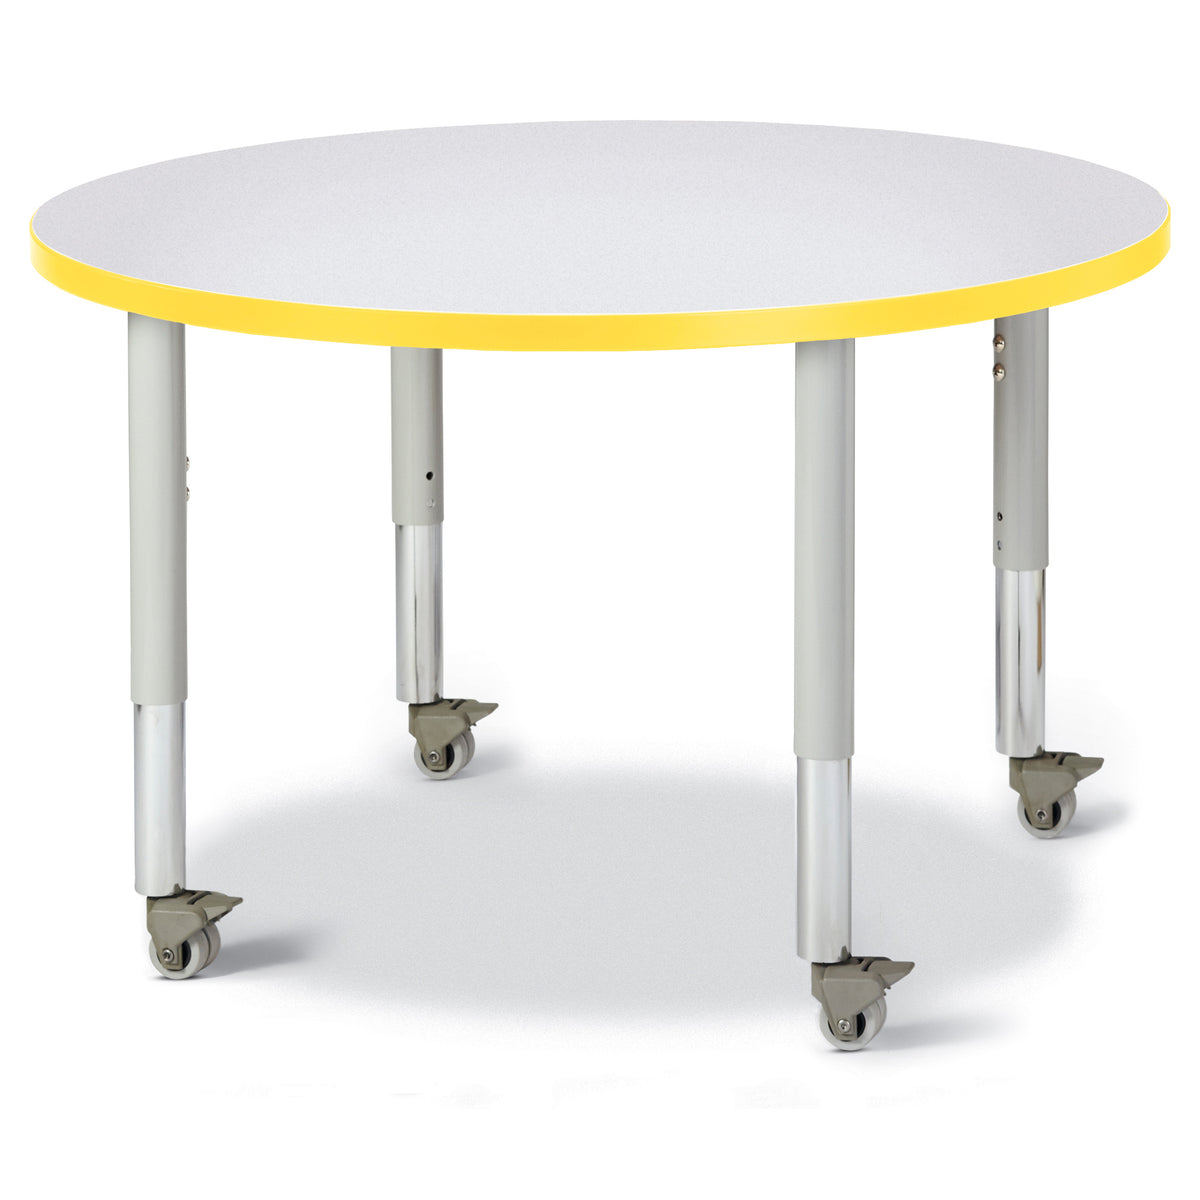 6488JCM007, Berries Round Activity Table - 36" Diameter, Mobile - Freckled Gray/Yellow/Gray